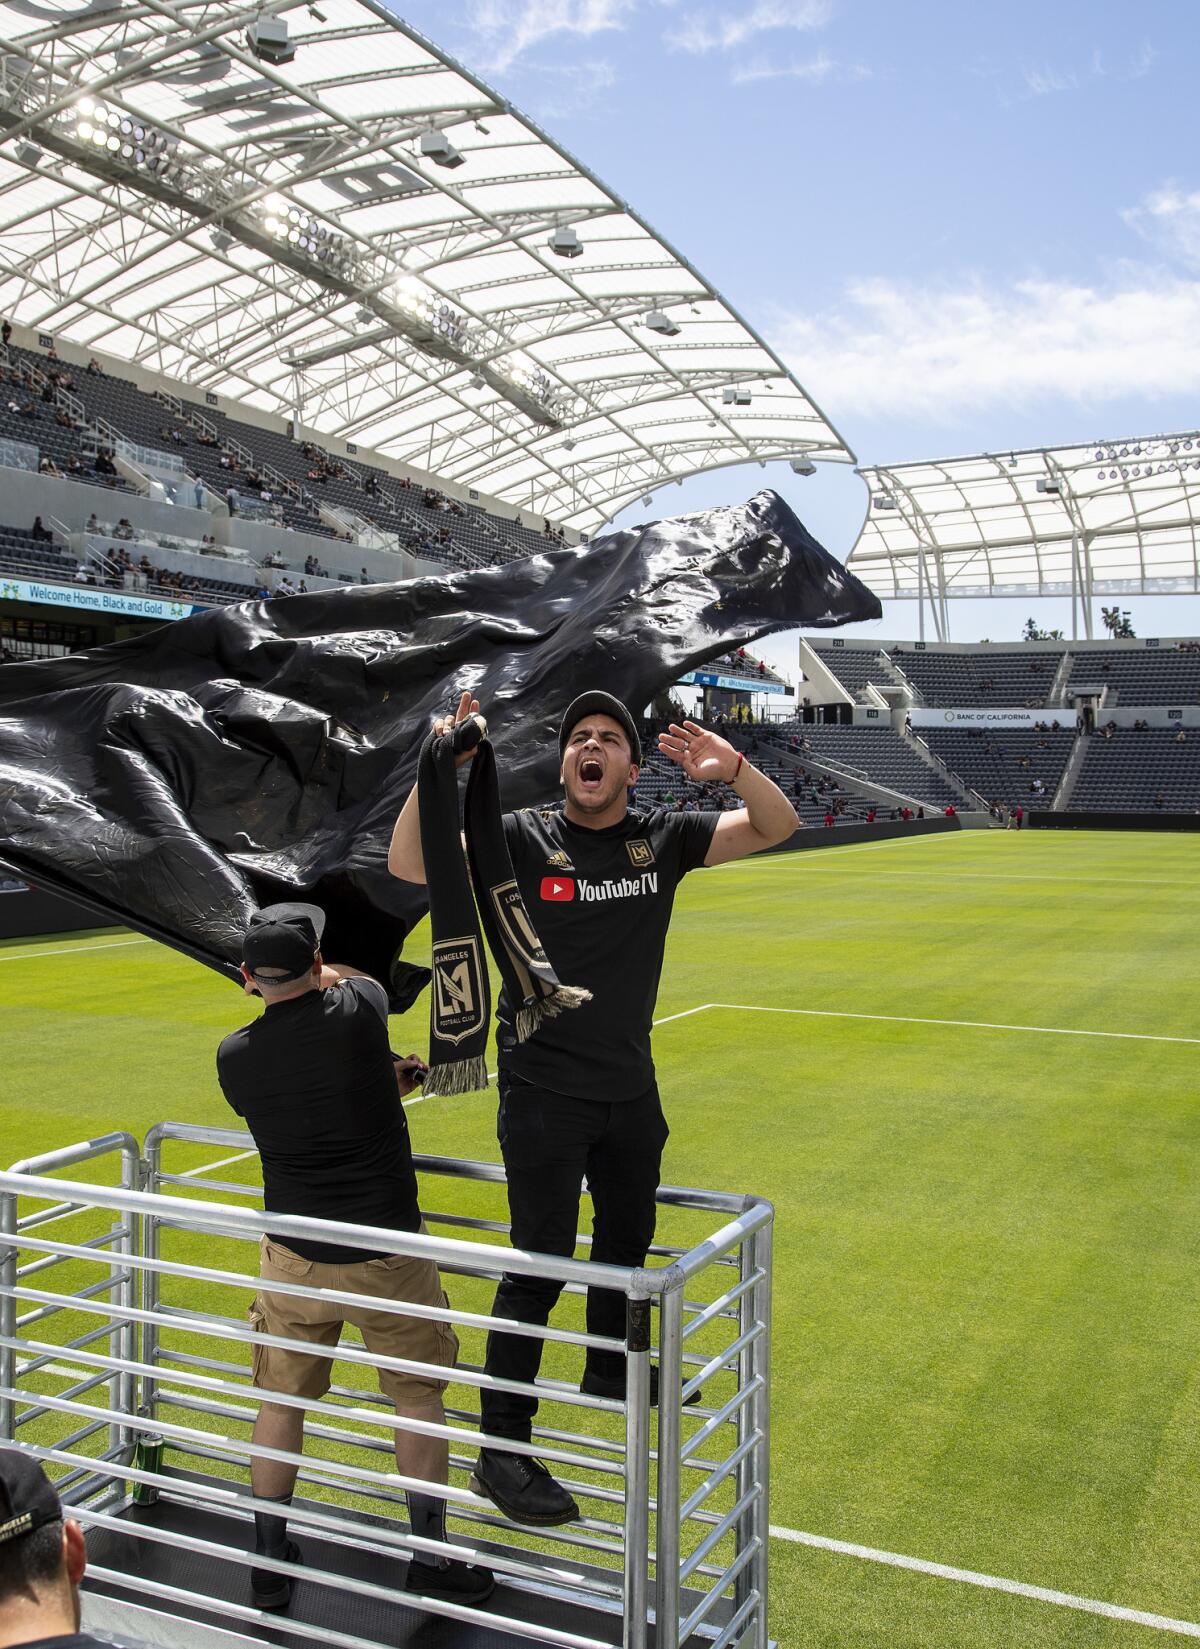 David Cordero of Victorville, right, leads a rally group called the Empire Boys while watching an LAFC soccer game on giant video screens inside the Banc of California Stadium.